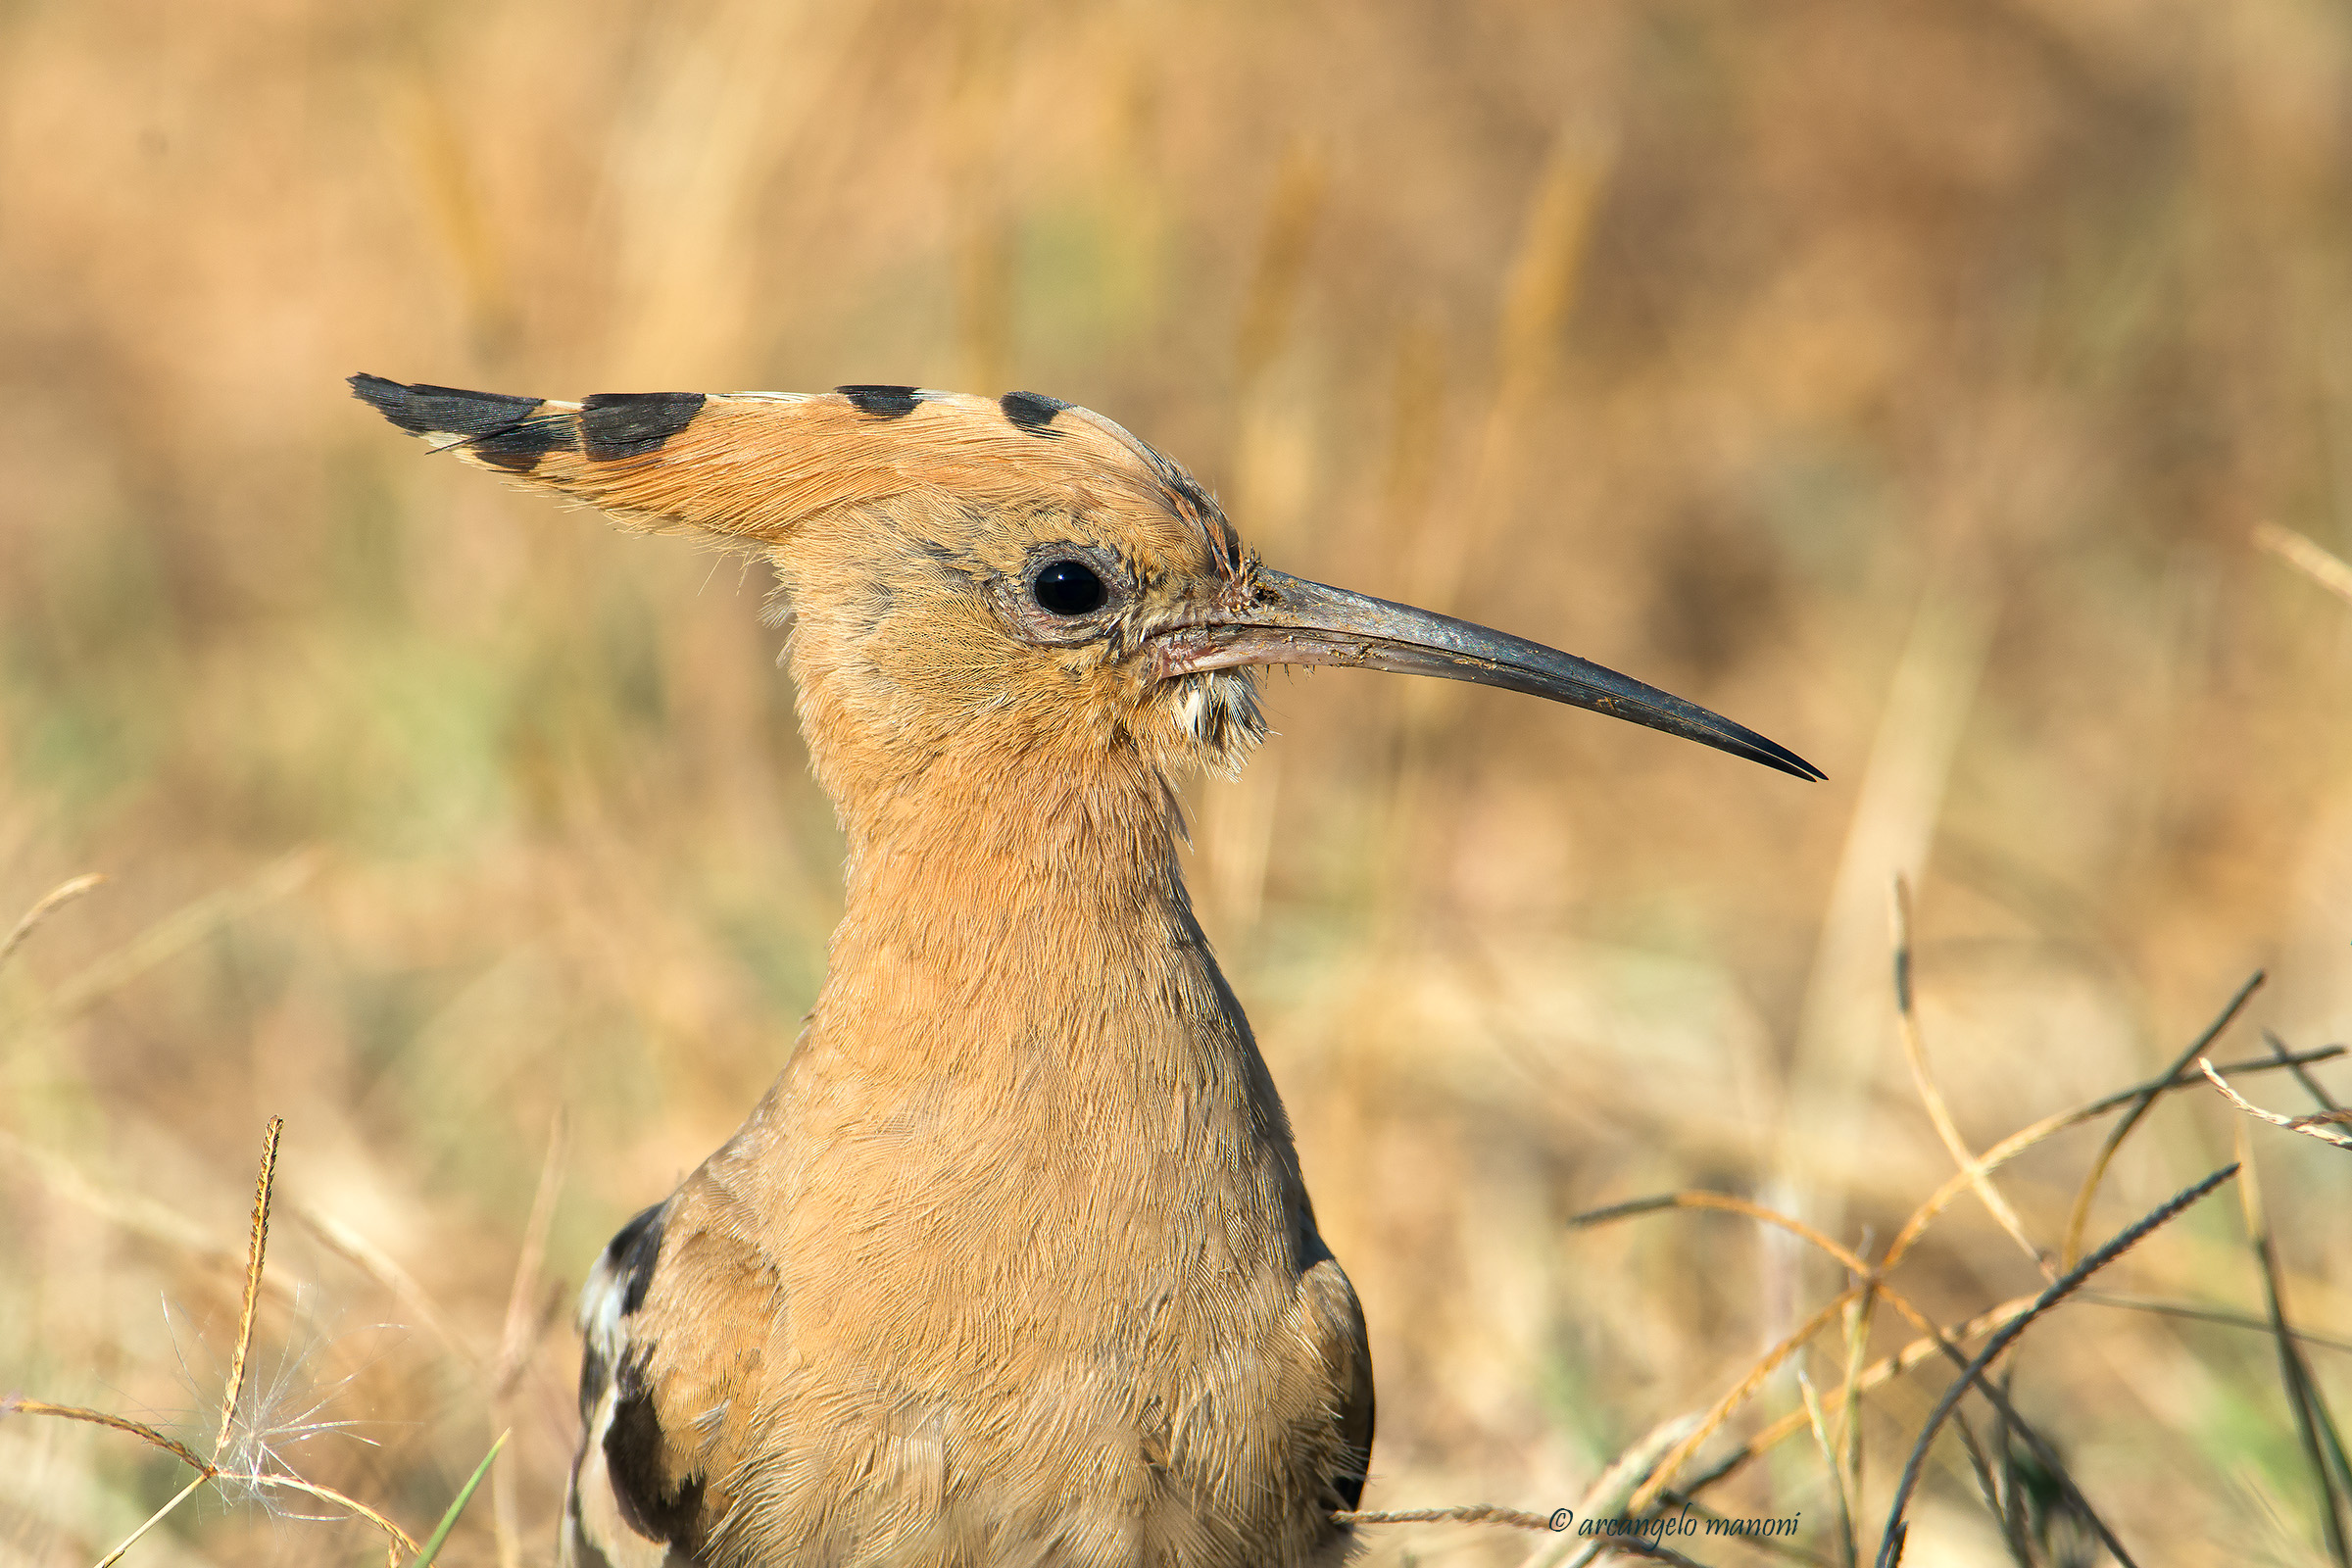 The dry summer with the hoopoe...